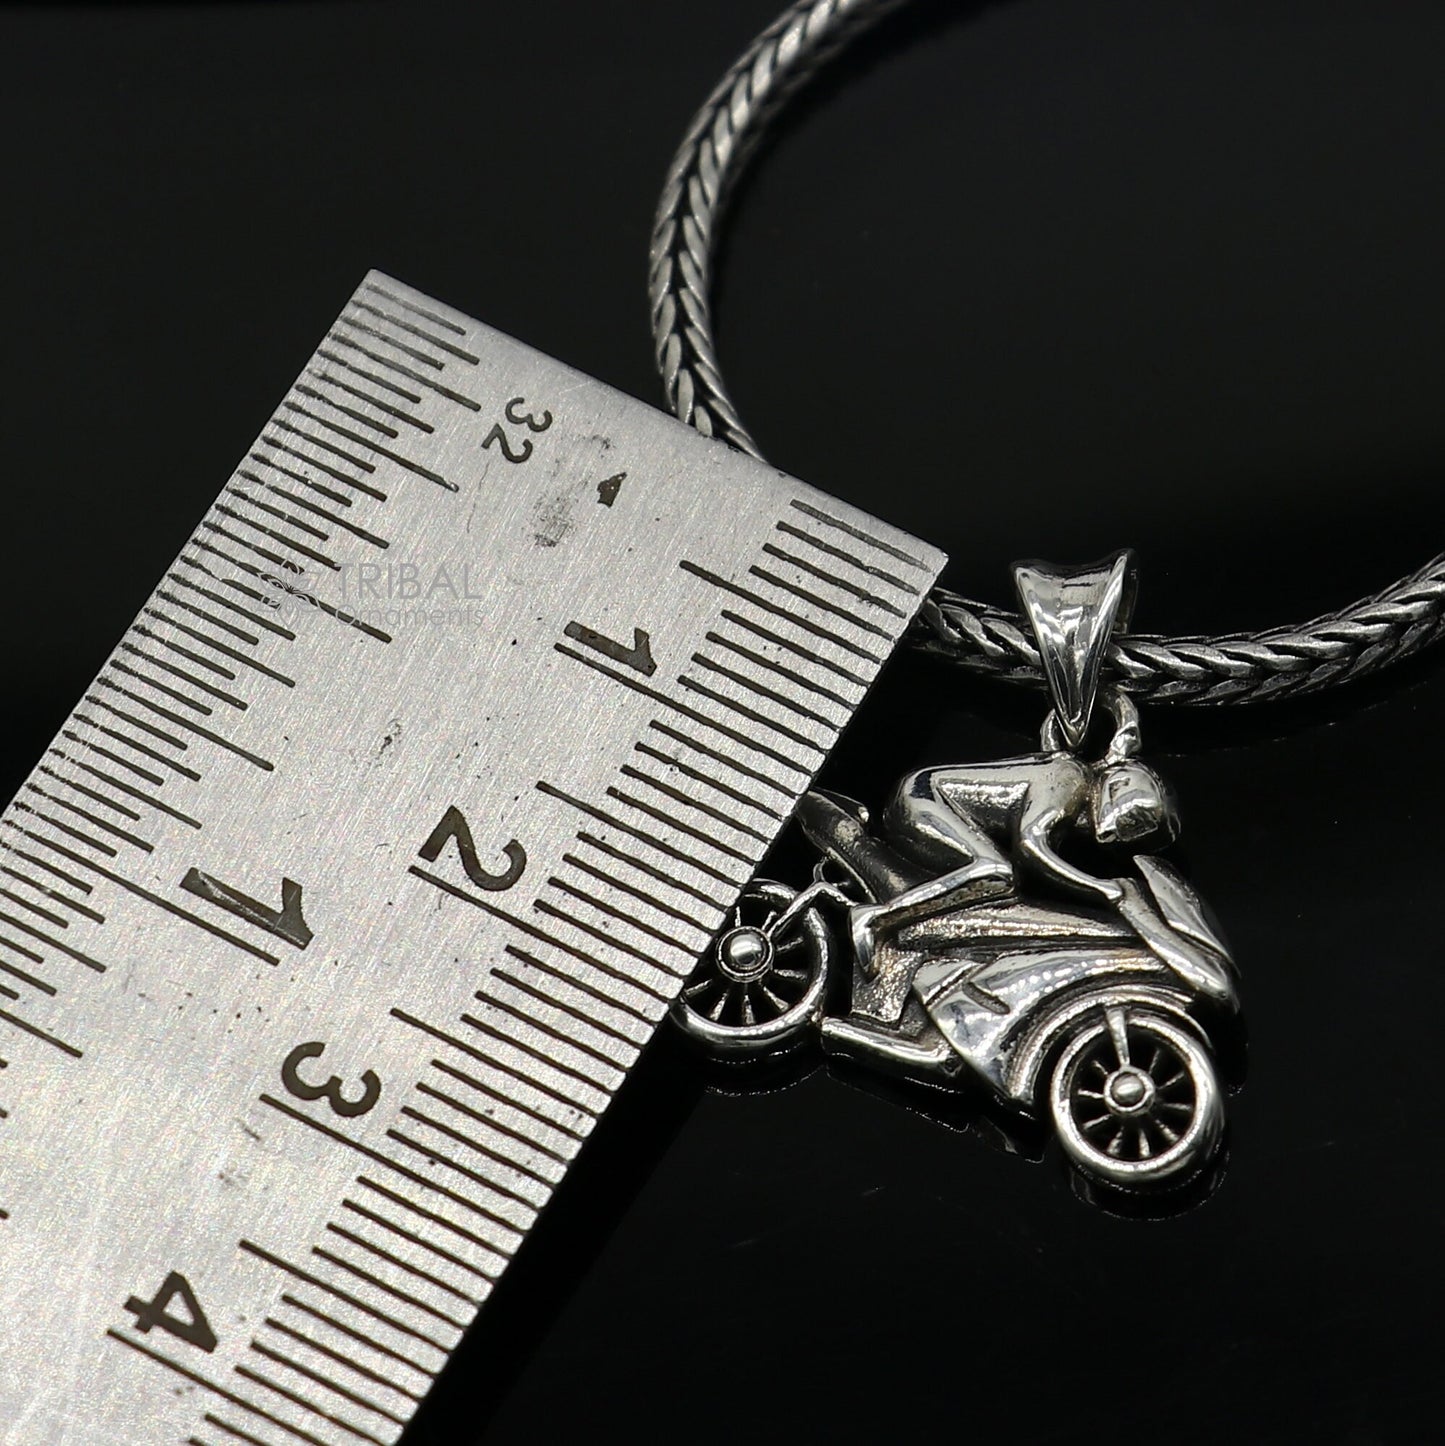 925 Sterling silver bike or motorcycle pendant, amazing stylish unique bike lover pendant unisex gifting jewelry nsp690 - TRIBAL ORNAMENTS